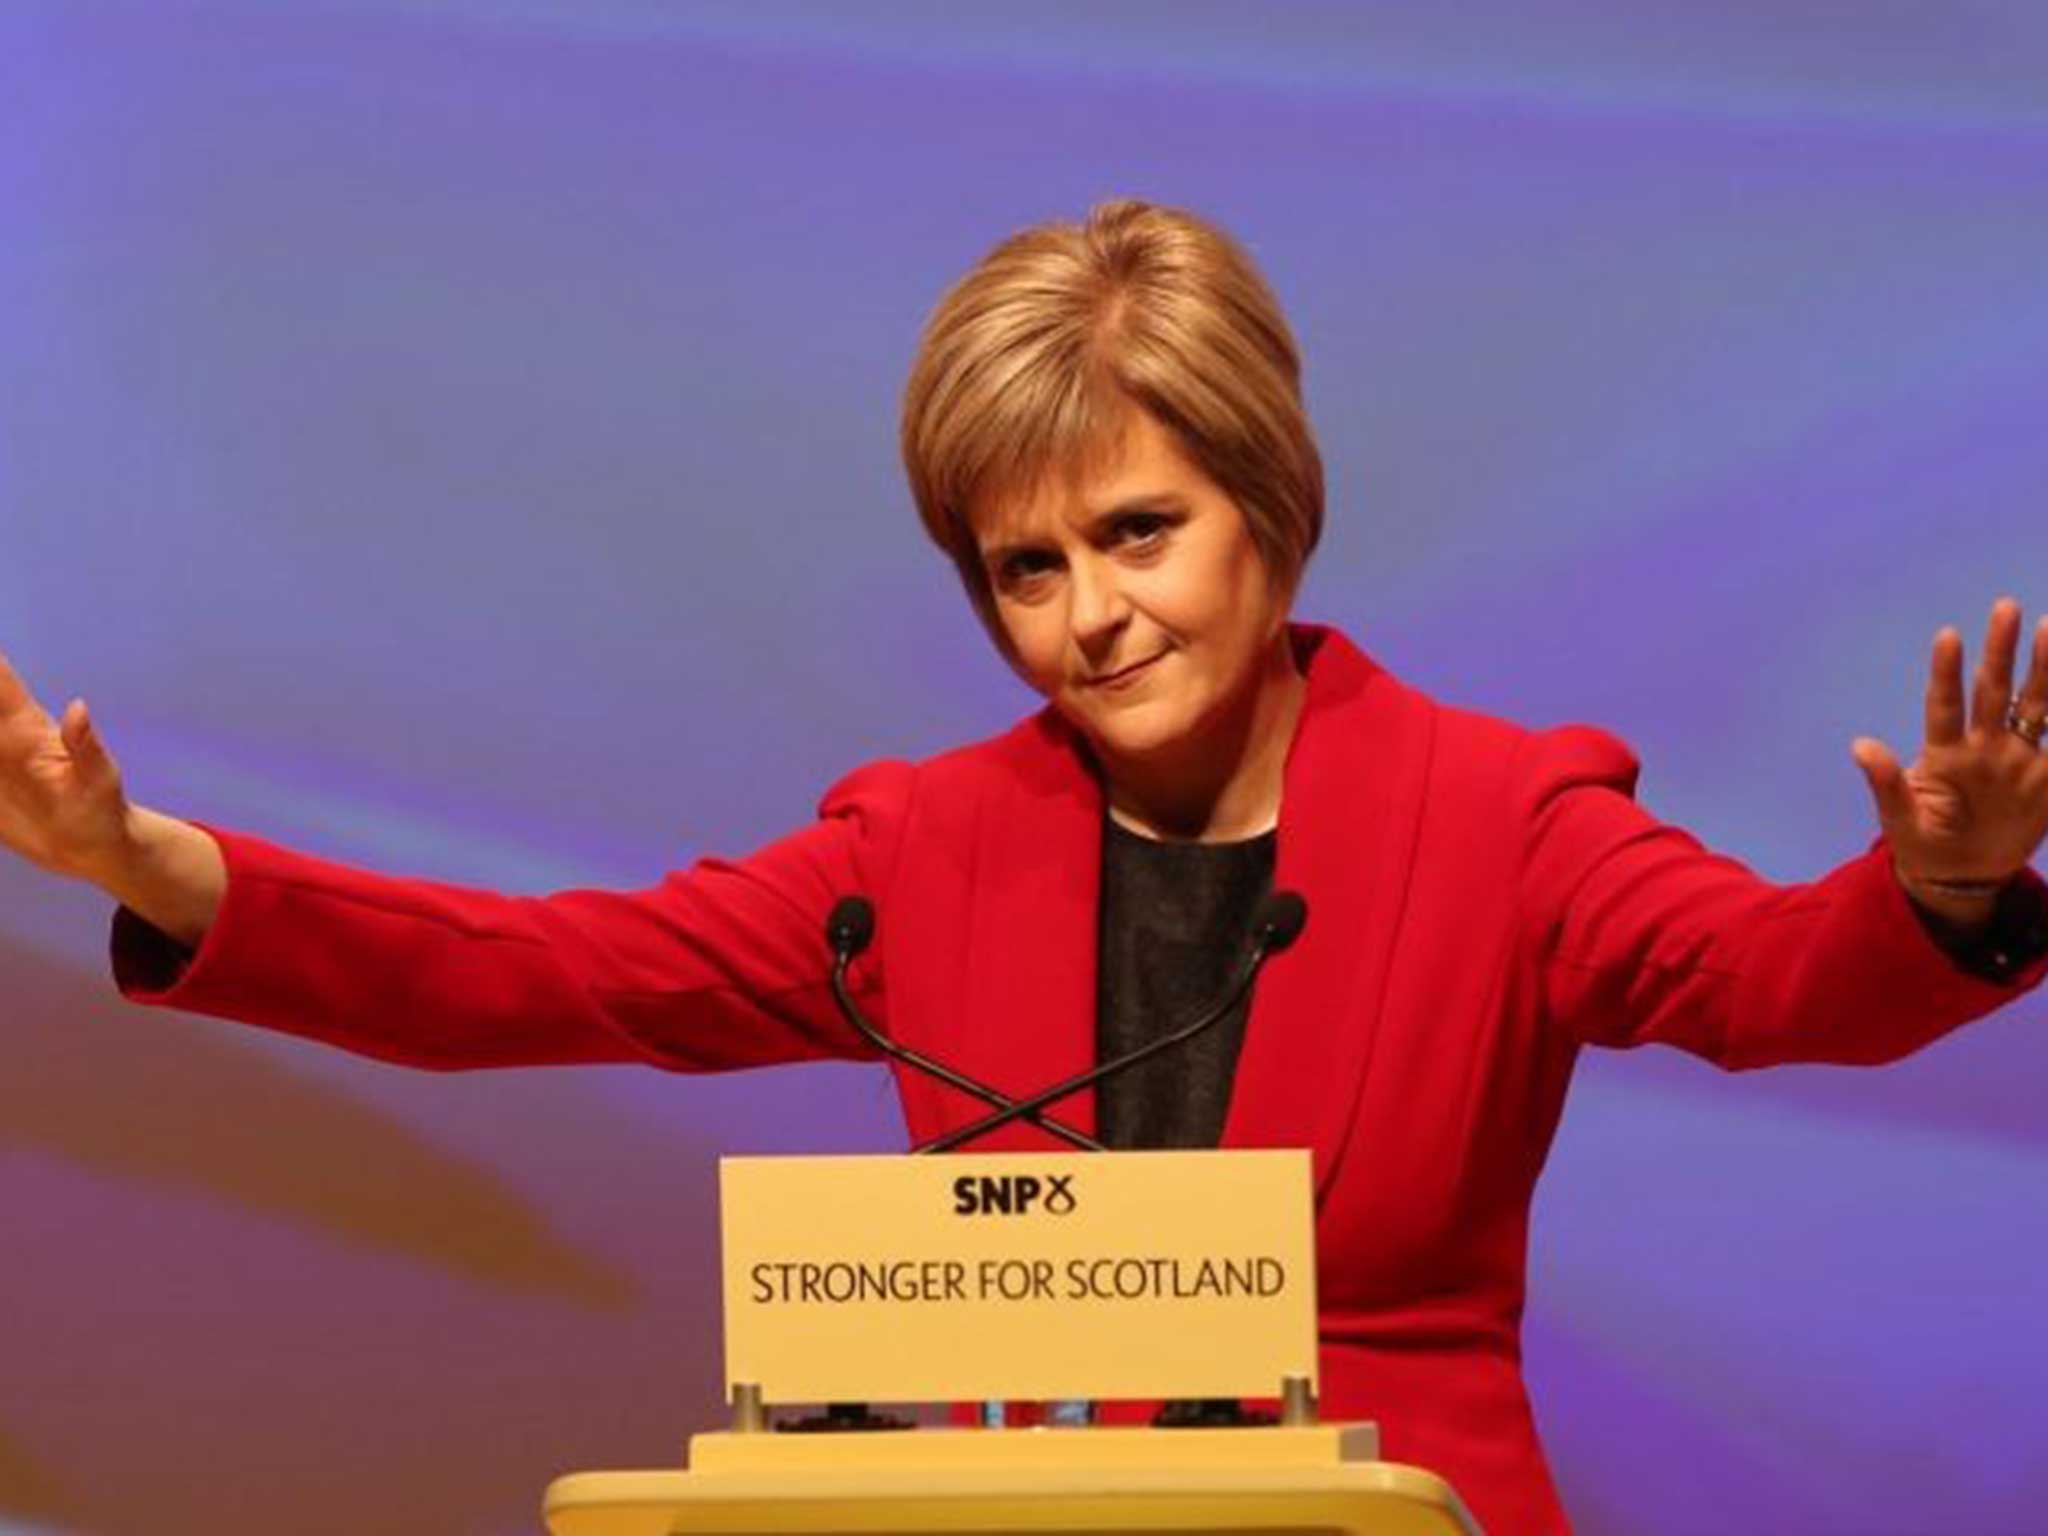 Nicola Sturgeon, the Scottish First Minister, said her colleagues at Westminster would vote on issues specifically concerning the health service in England in order to protect funding to the NHS in Scotland